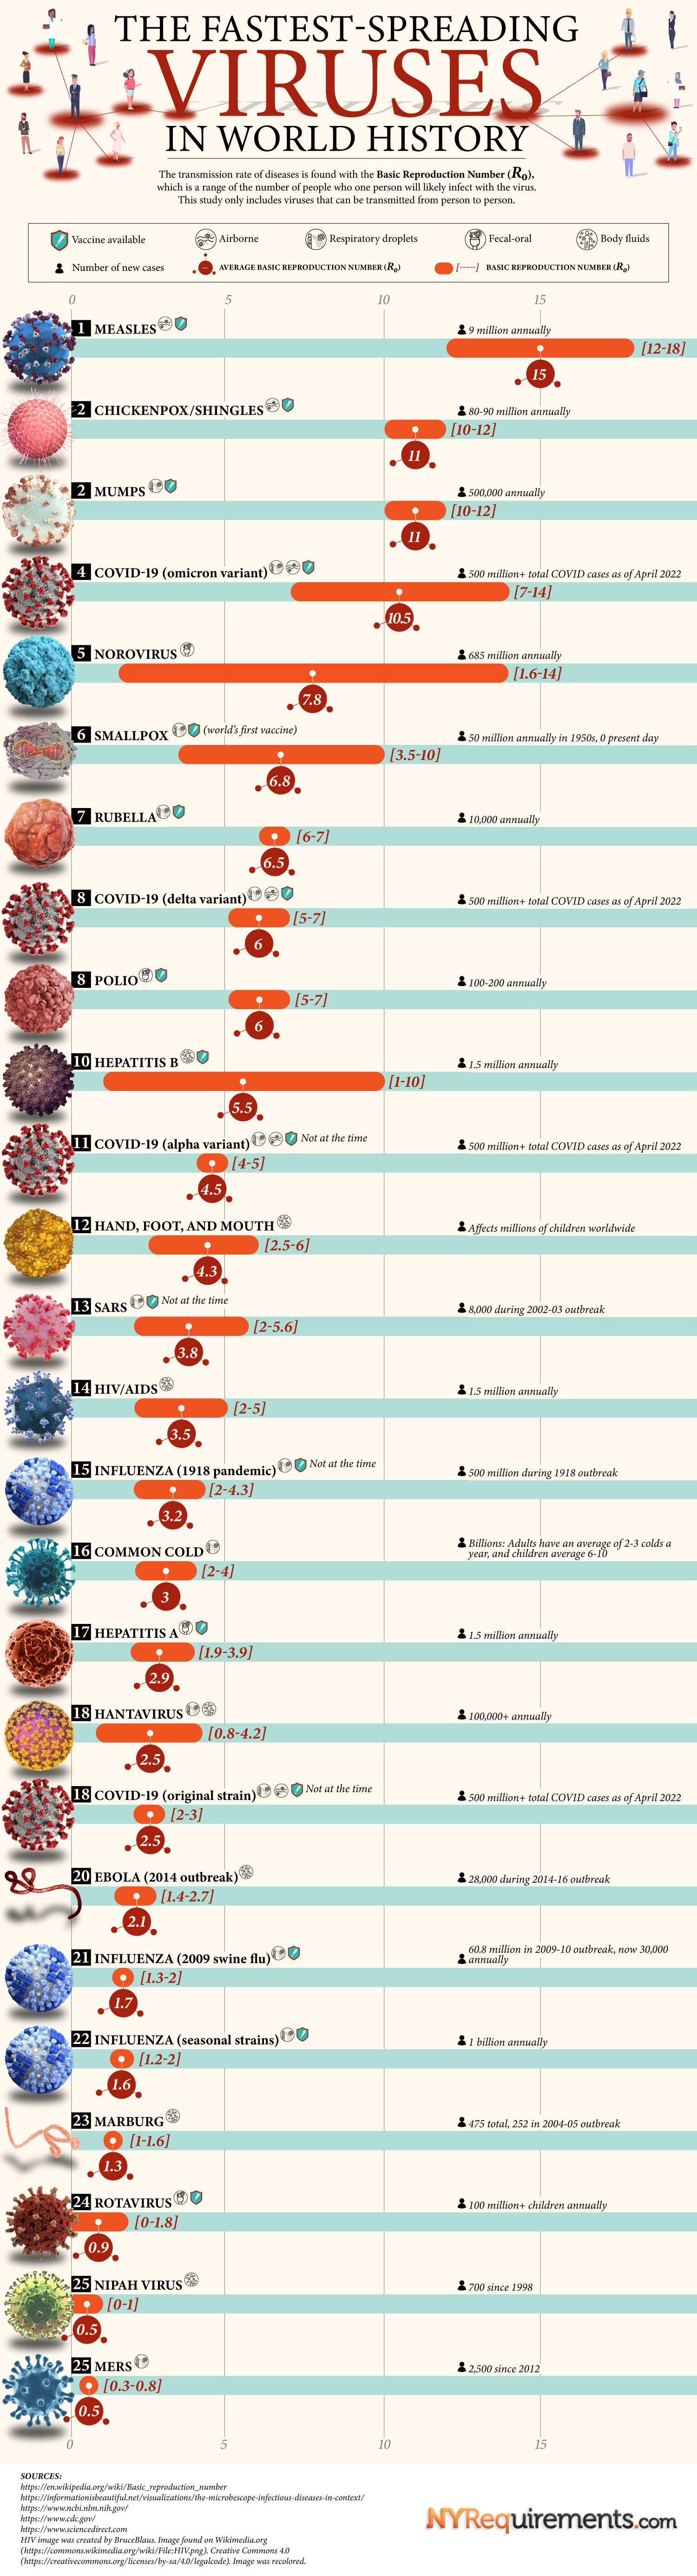 The Fastest-Spreading Viruses in World History - Infographic